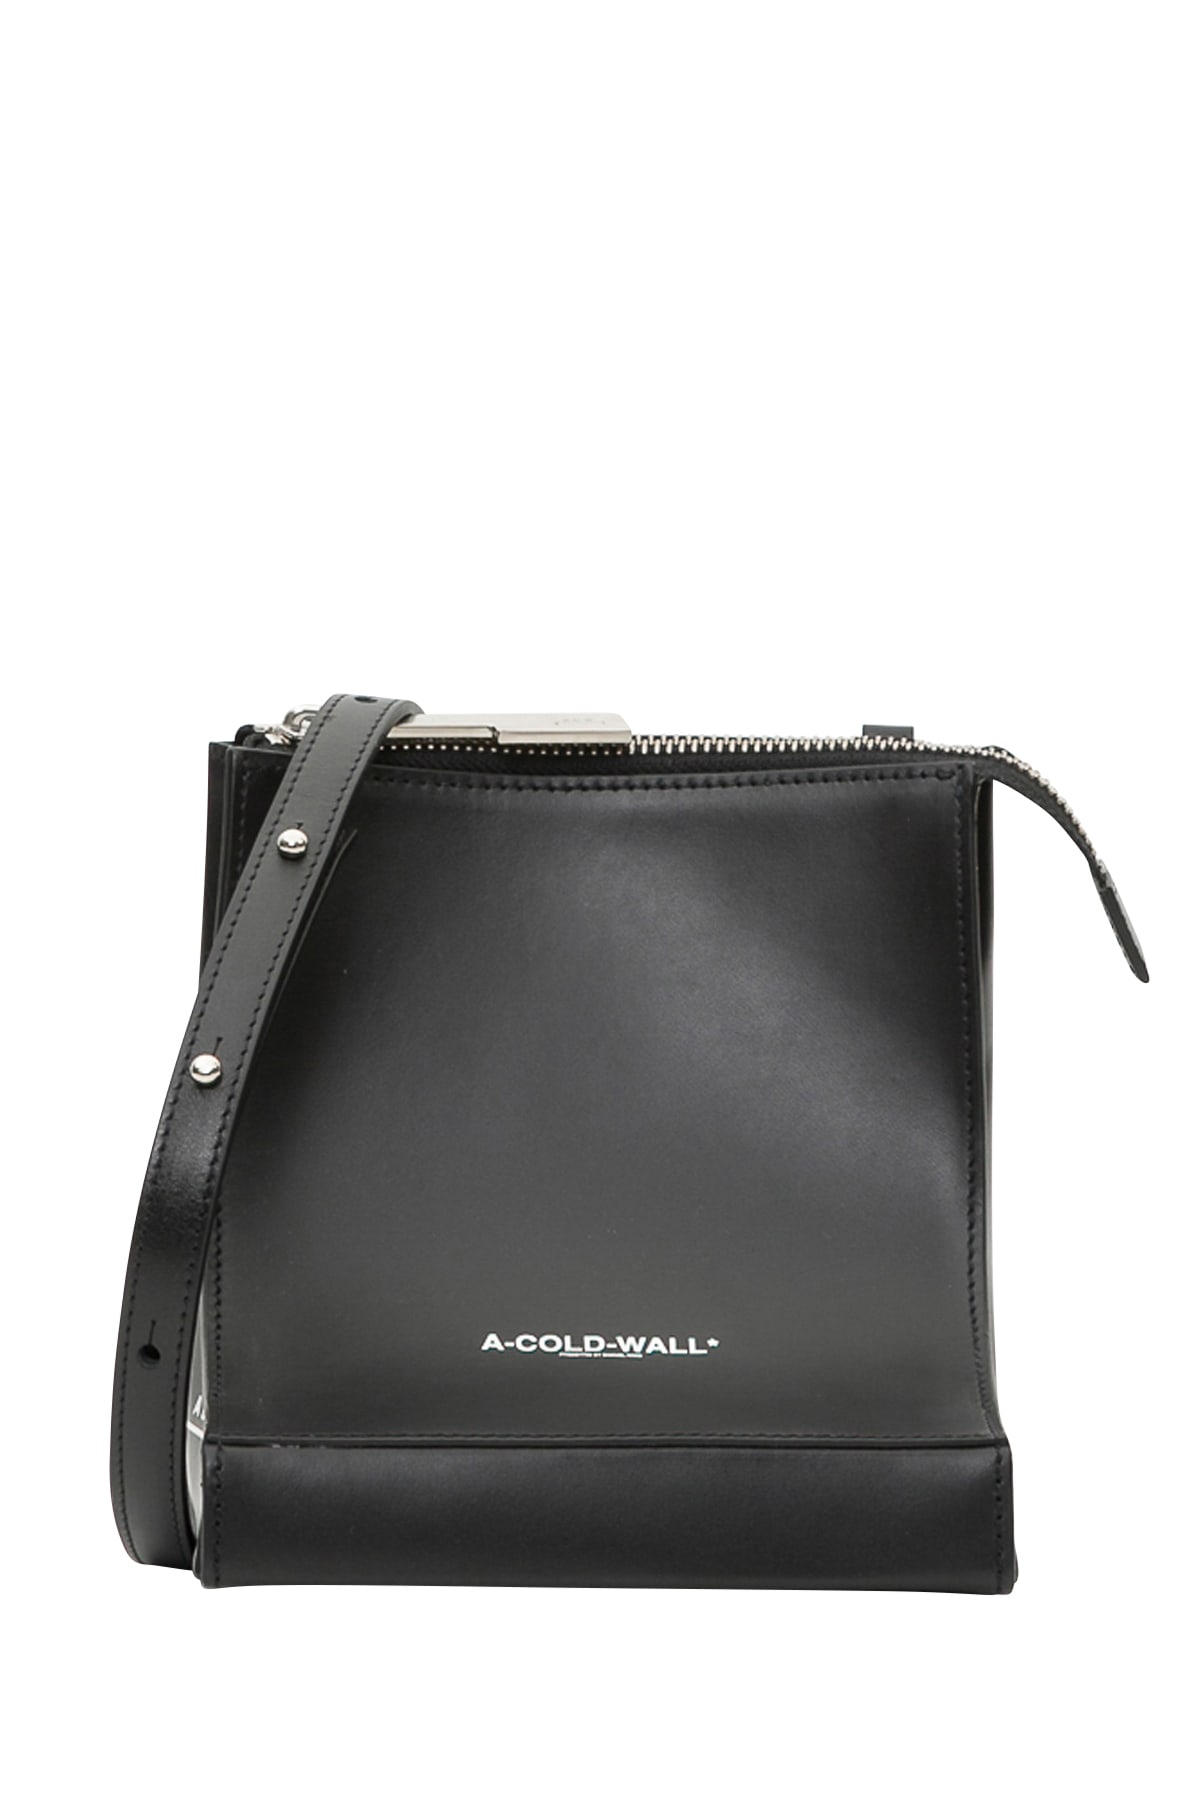 A-COLD-WALL A-COLD-WALL Small Curved Bag - Nero - 10965808 | italist